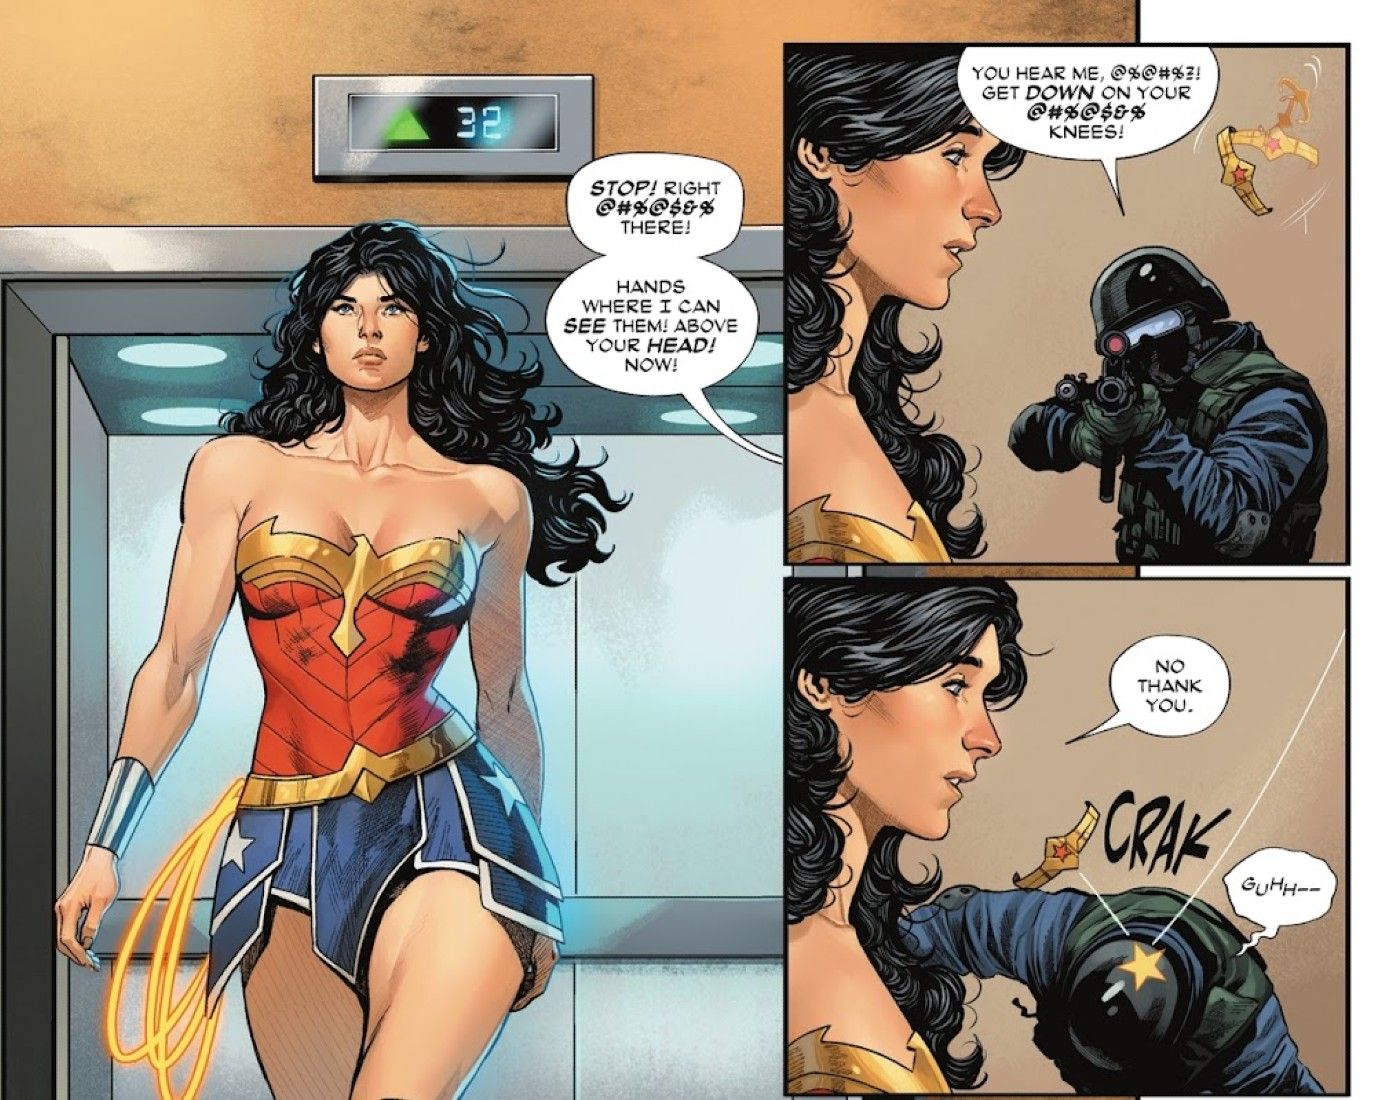 Wonder Woman fights a guard in comic book panels.